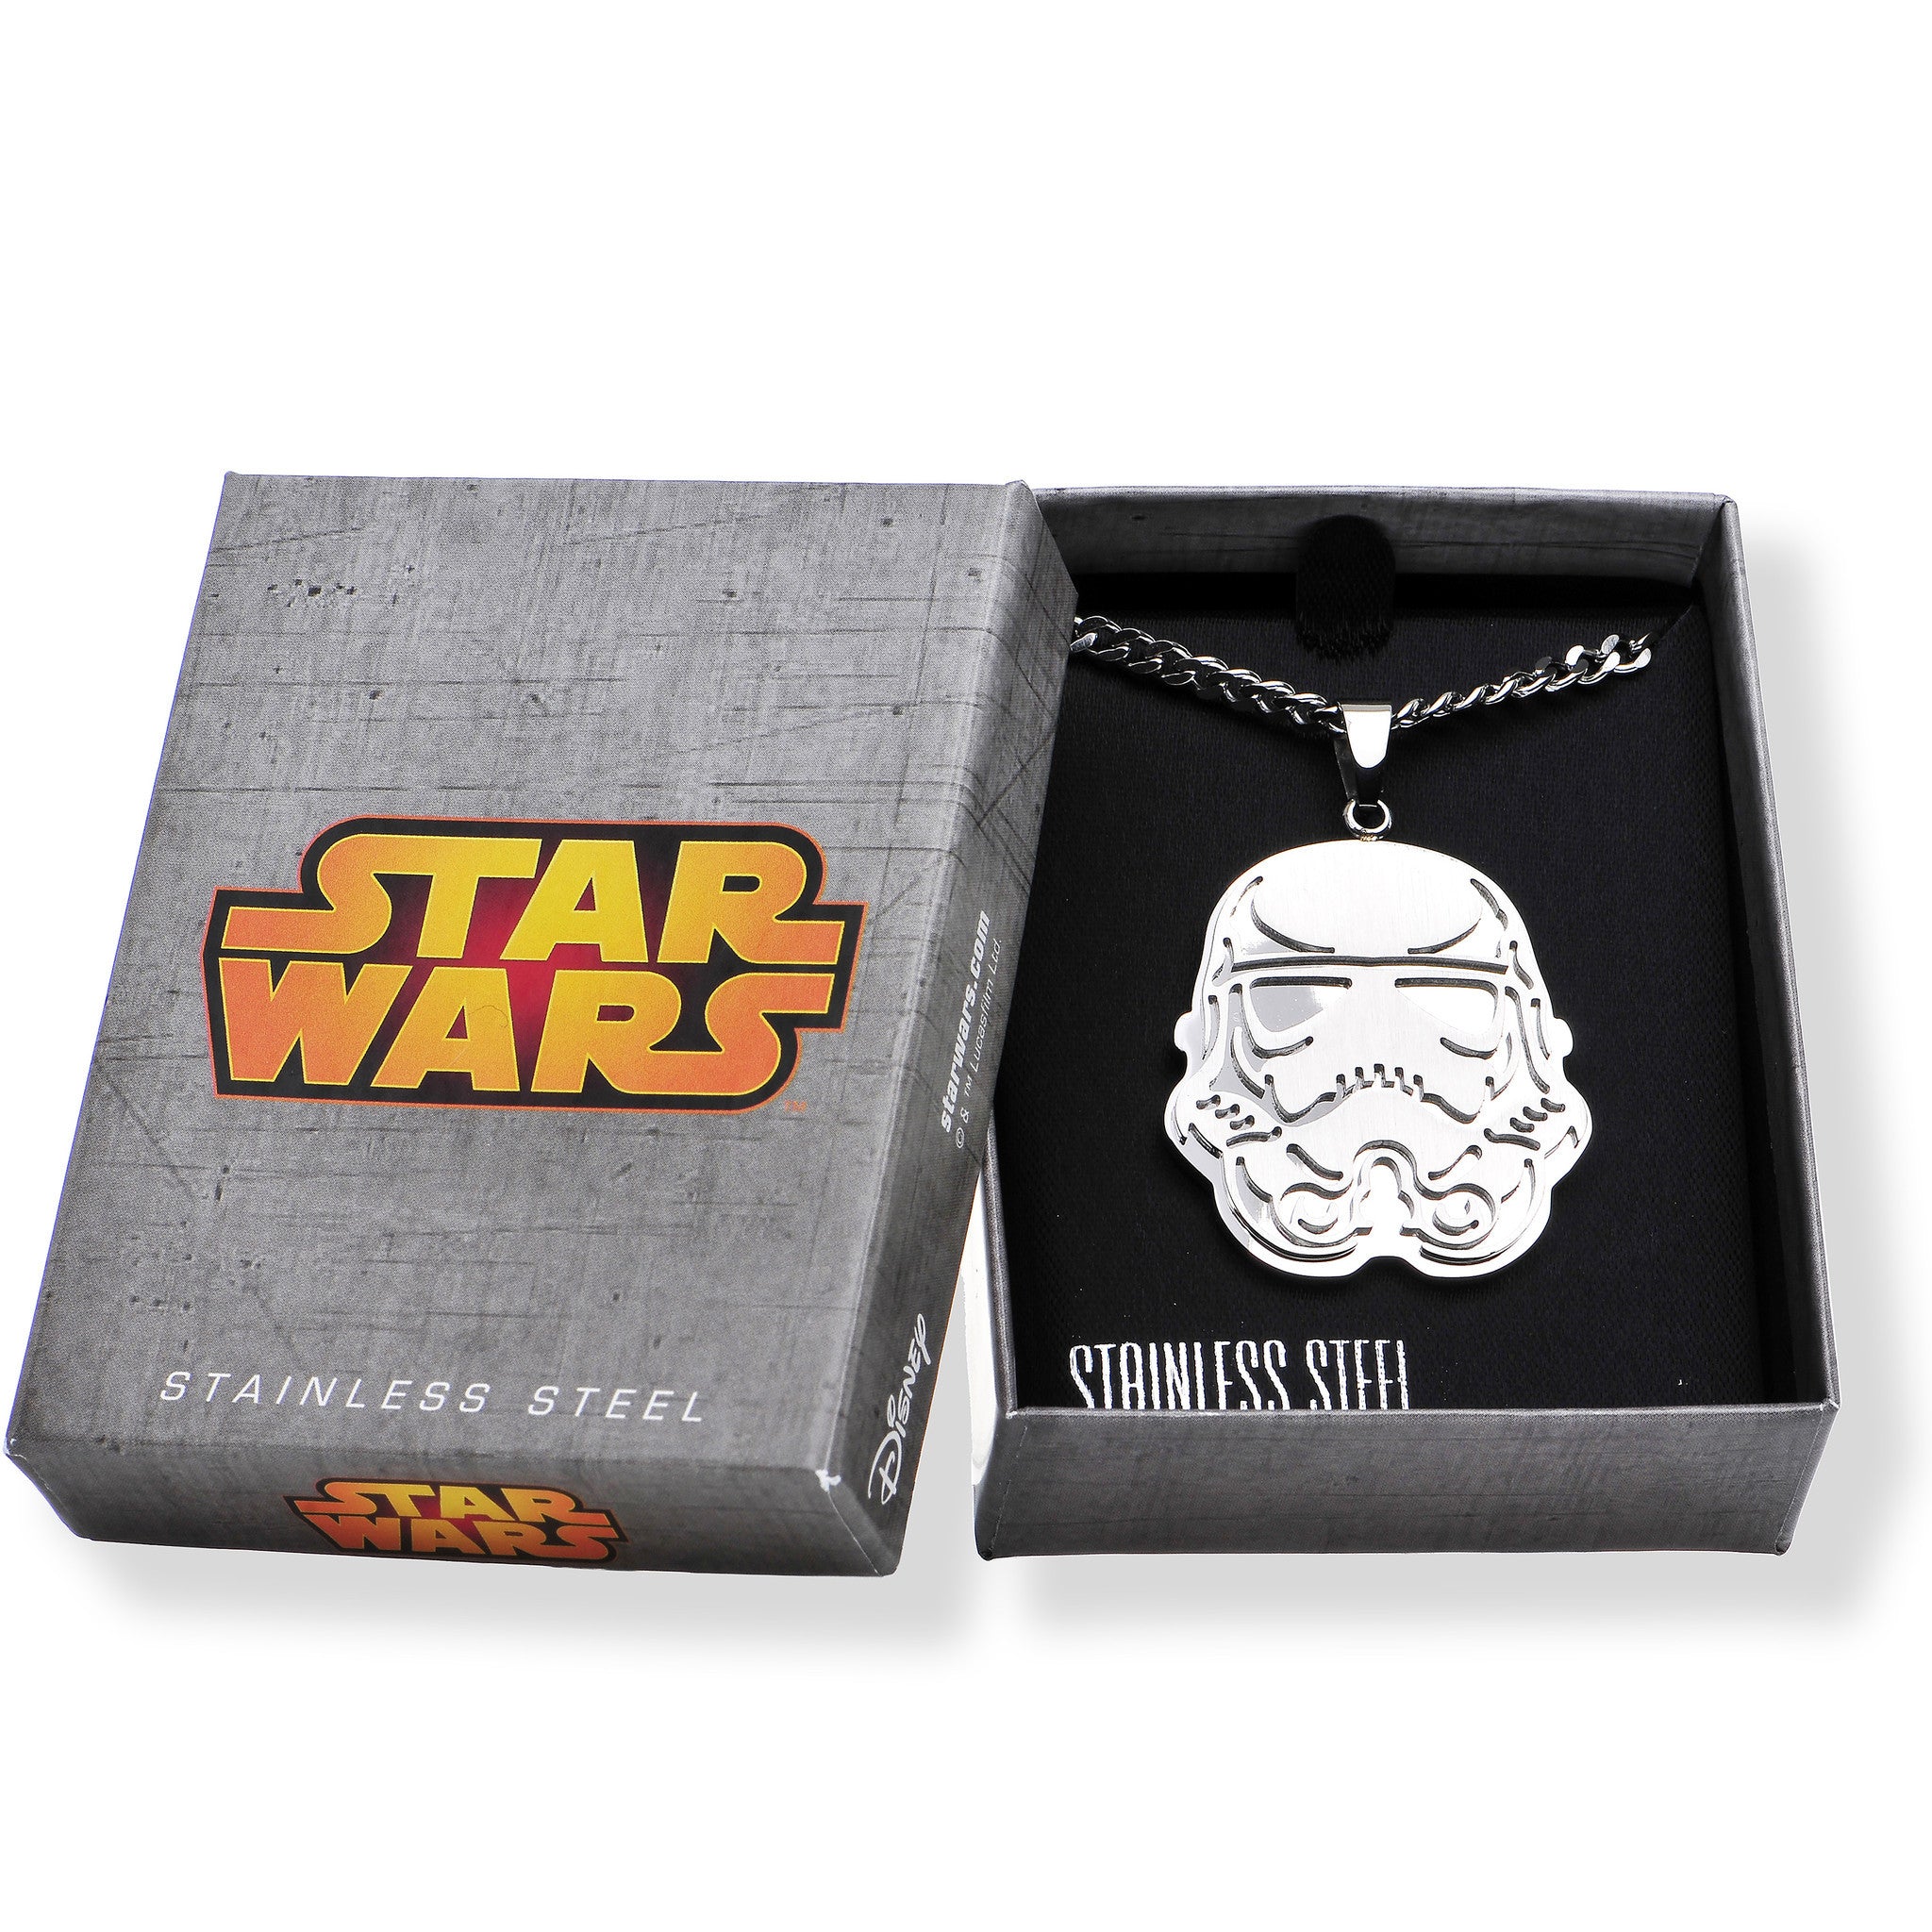 Officially Licensed Steel Star Wars Stormtrooper Pendant Necklace